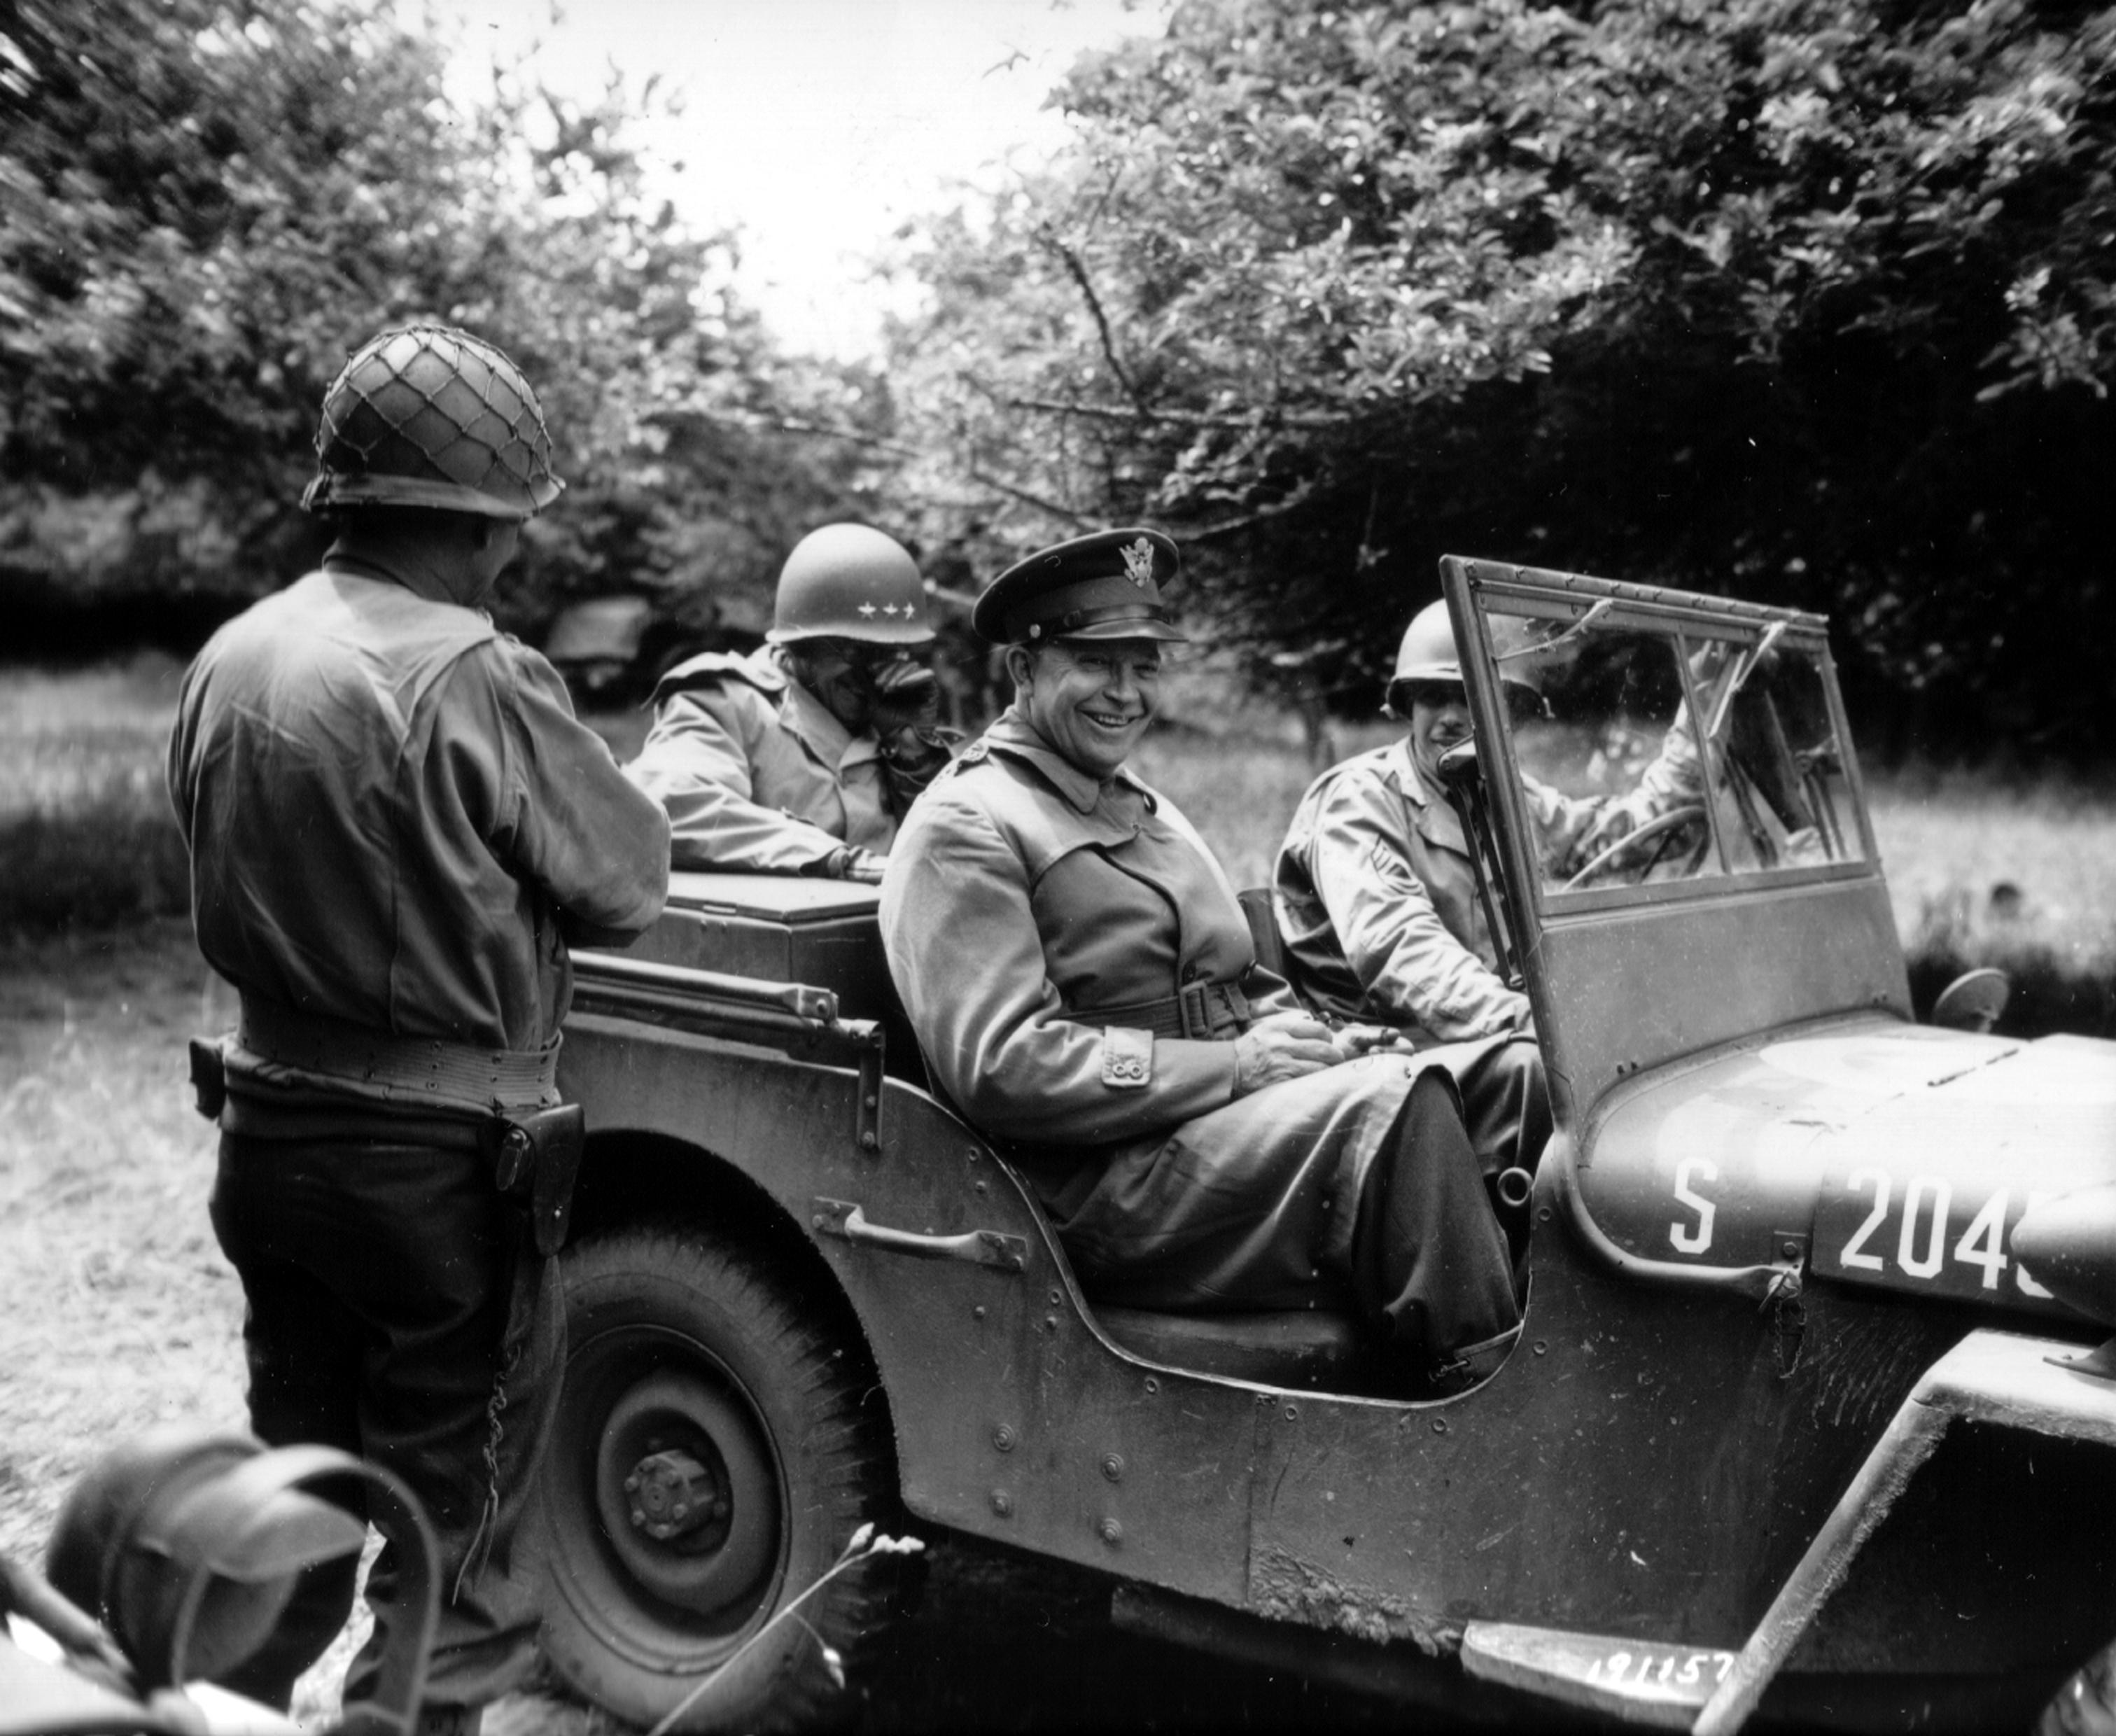 Generals Dwight Eisenhower and Omar Bradley share a laugh as they leave Gen Ira Wyche’s 79th Division headquarters in Huanville, Normandy, France, July 4, 1944.